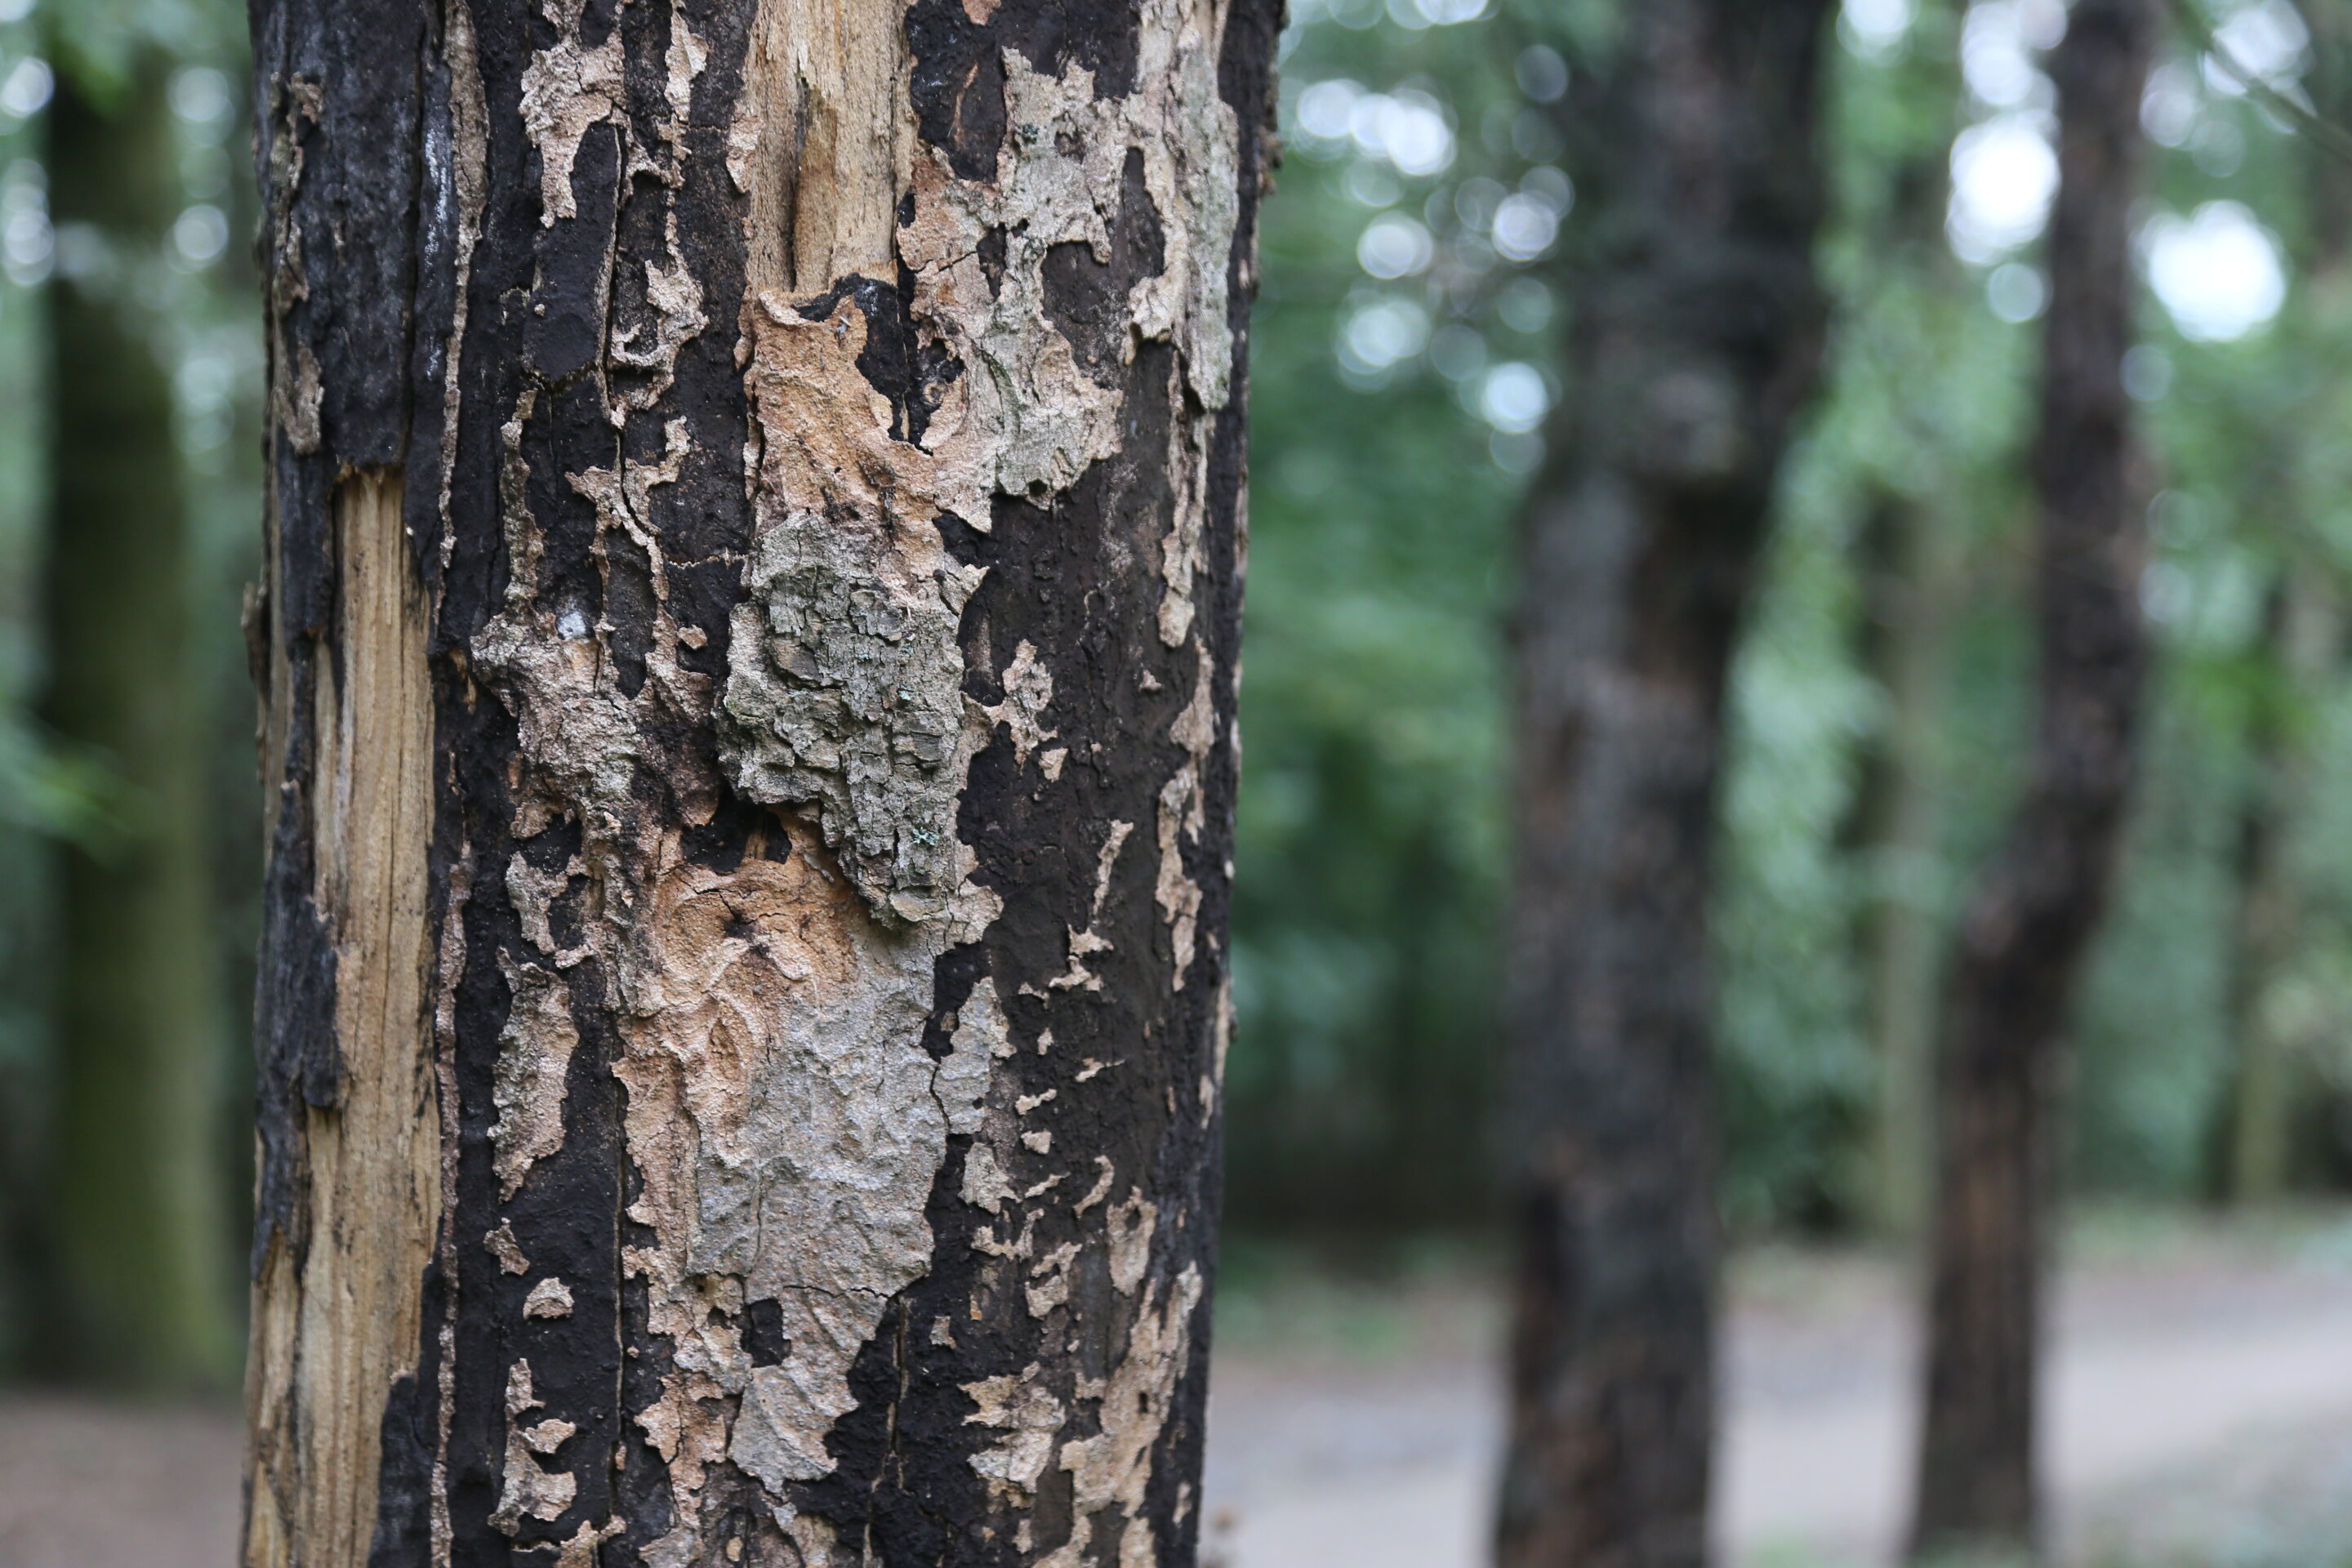 Monitoring pollen sampling stations can help track ‘Sooty Bark Disease,’ which poses a threat to both maple trees and humans.